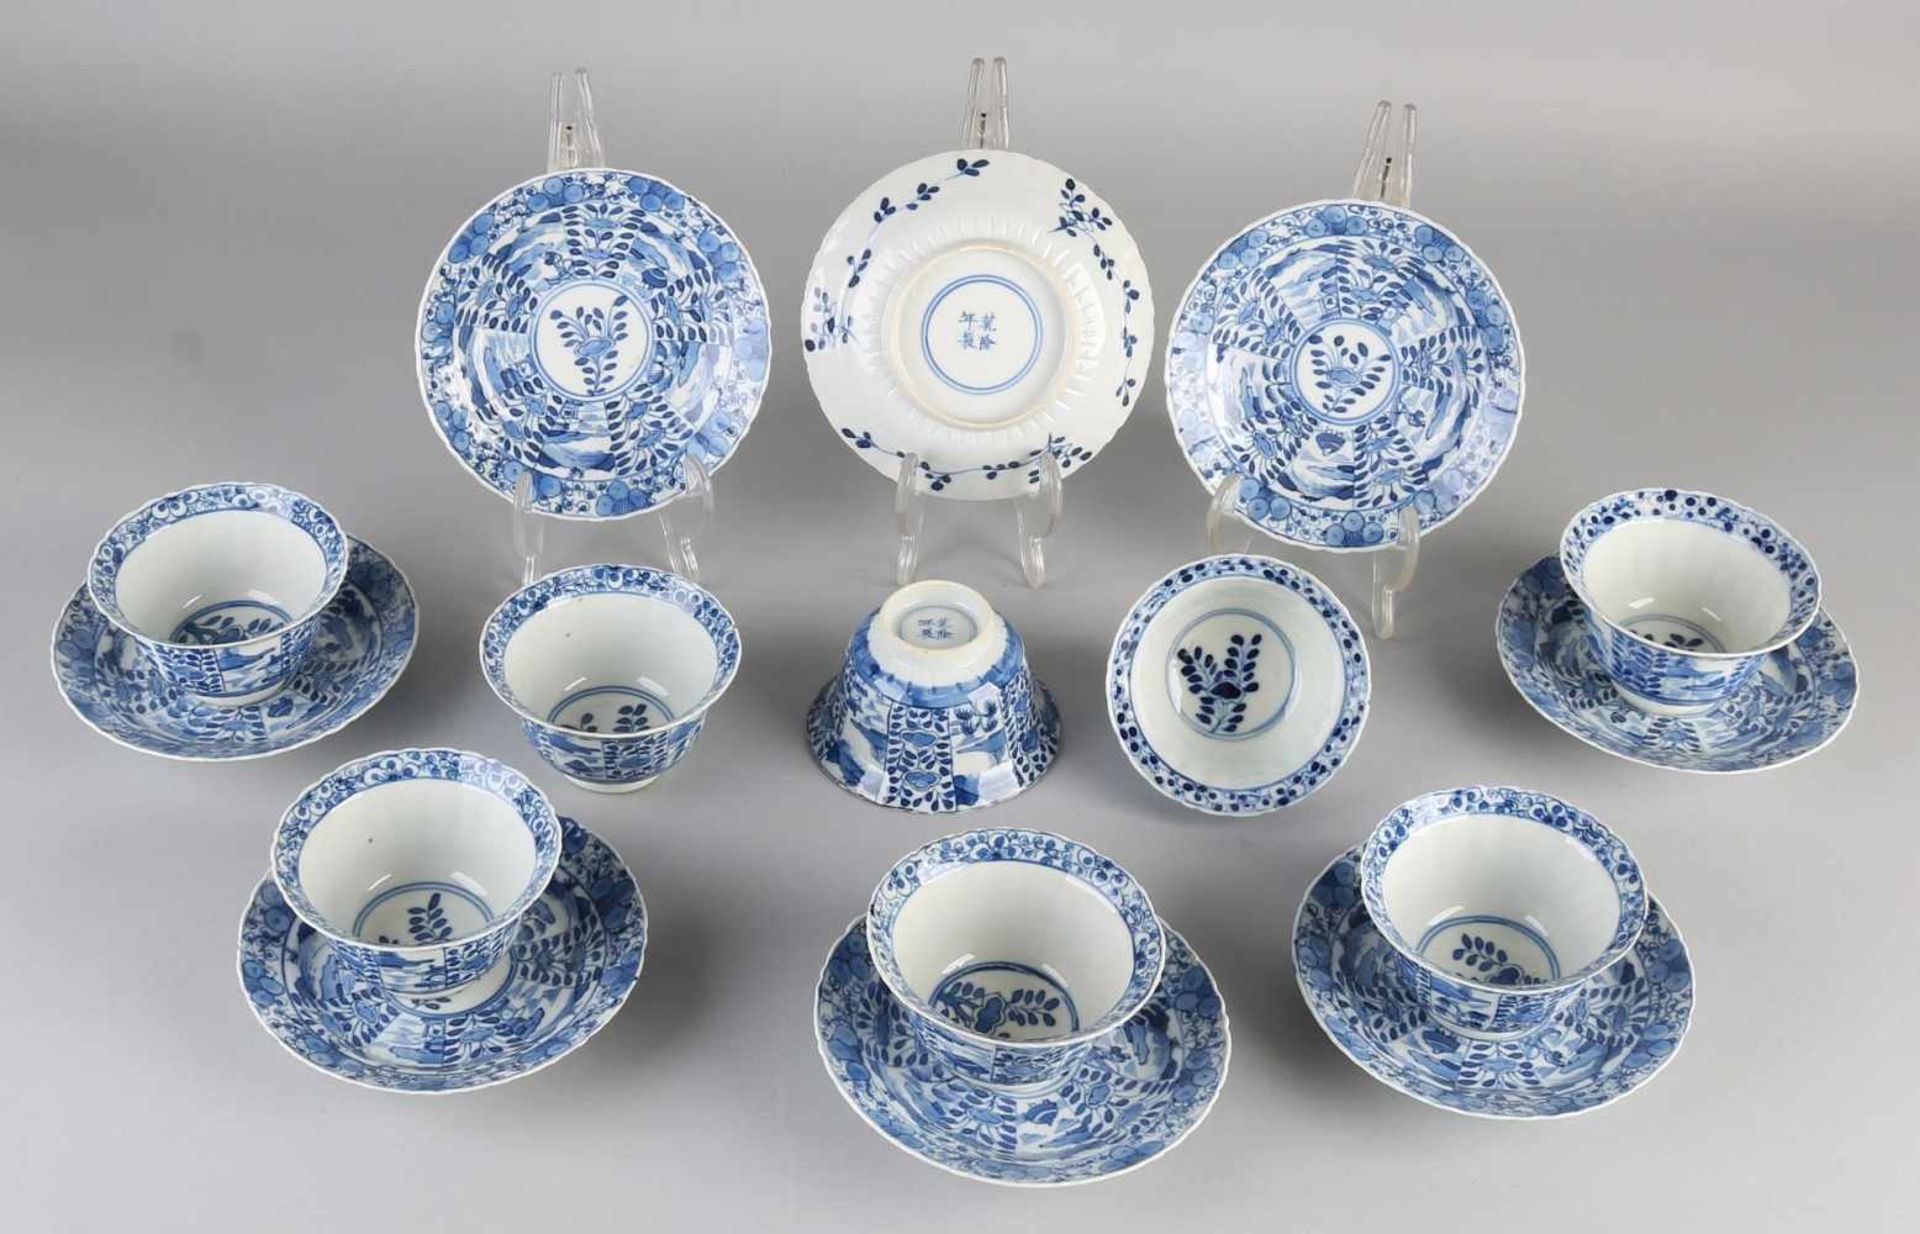 Eight pieces of 19th century Chinese porcelain cups and saucers with landscapes / scenery